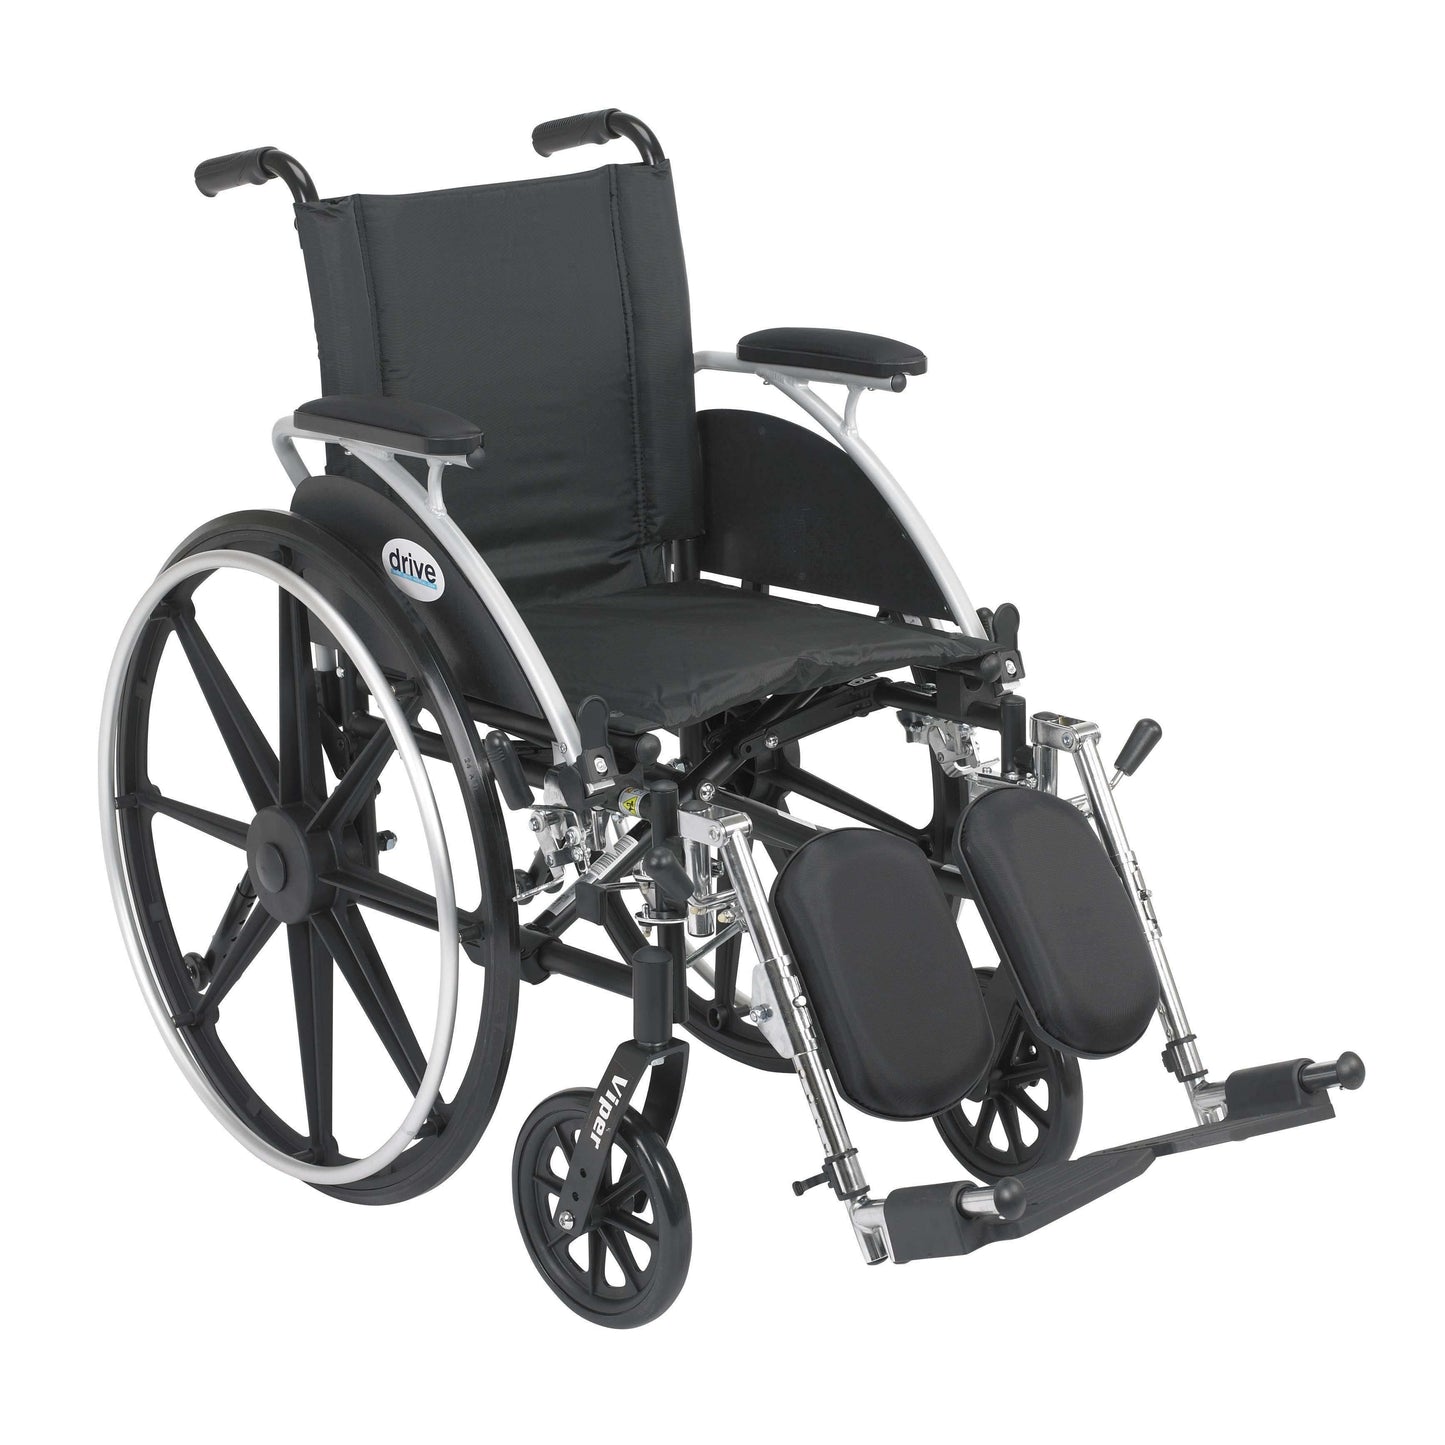 Drive l414dda-elr Viper Wheelchair with Flip Back Removable Arms, Desk Arms, Elevating Leg Rests, 14" Seat